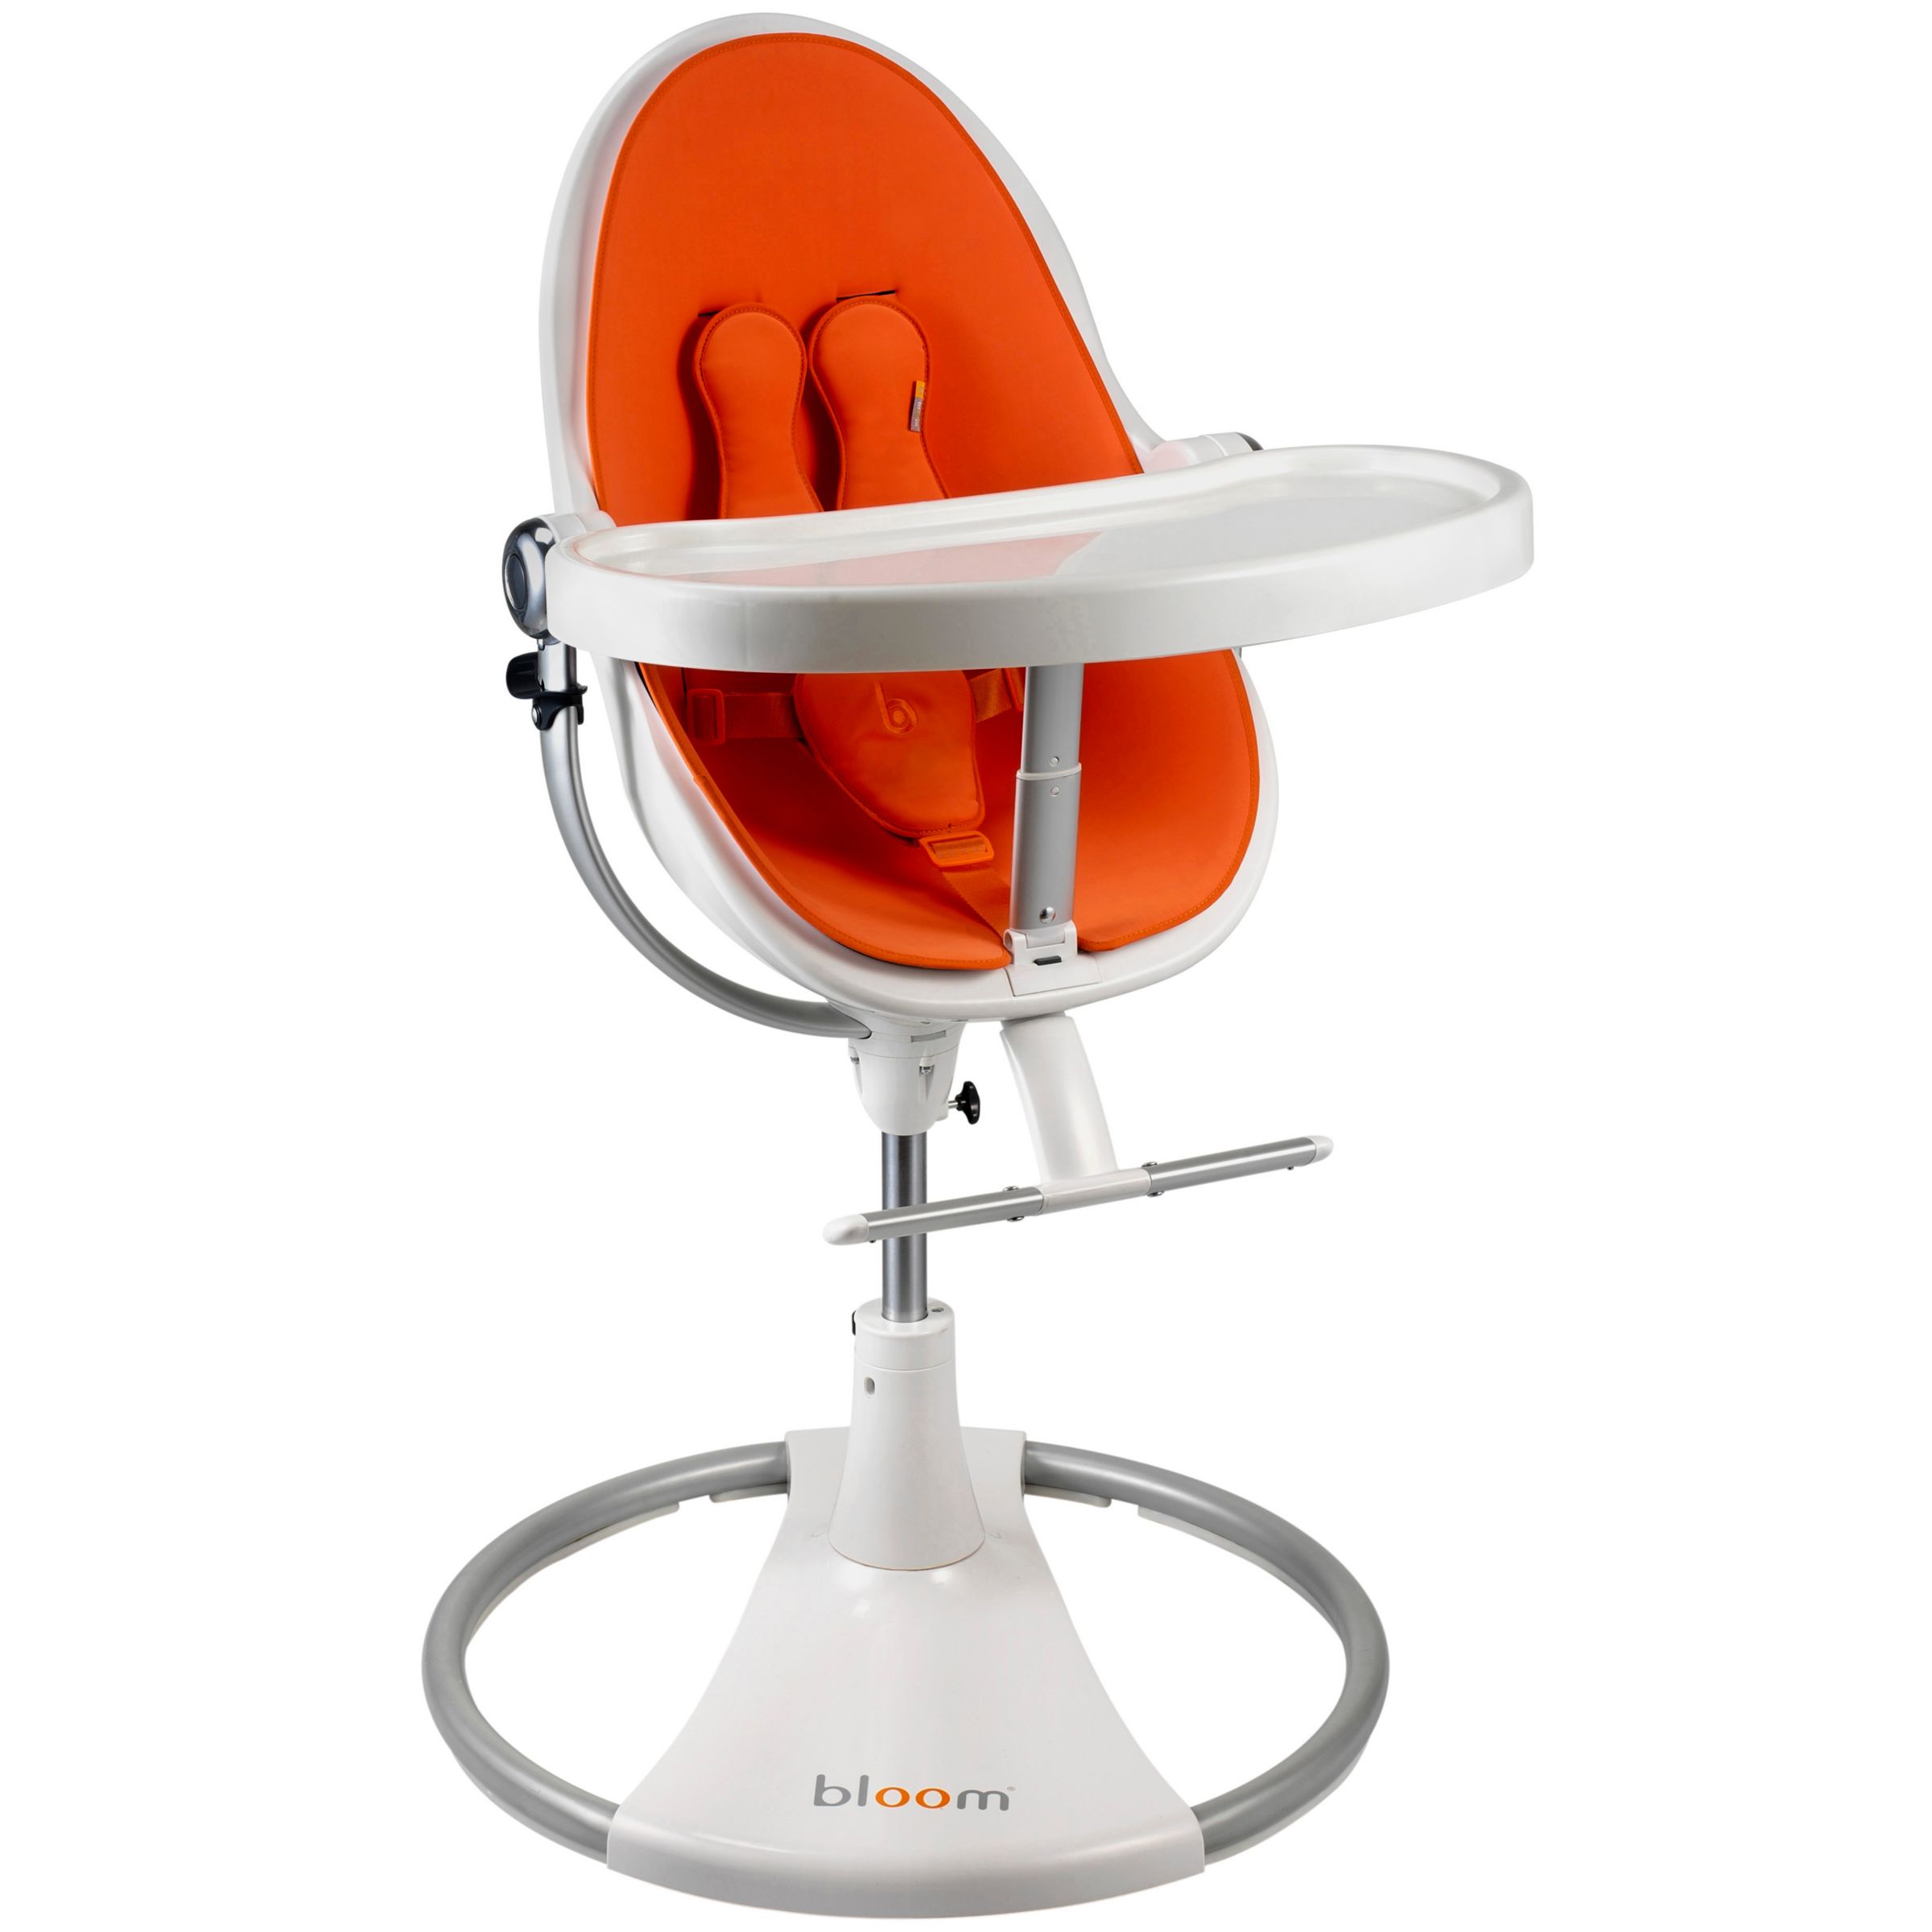 bloom Fresco Classic Contemporary Leatherette Baby Chair, Harvest Orange at JohnLewis